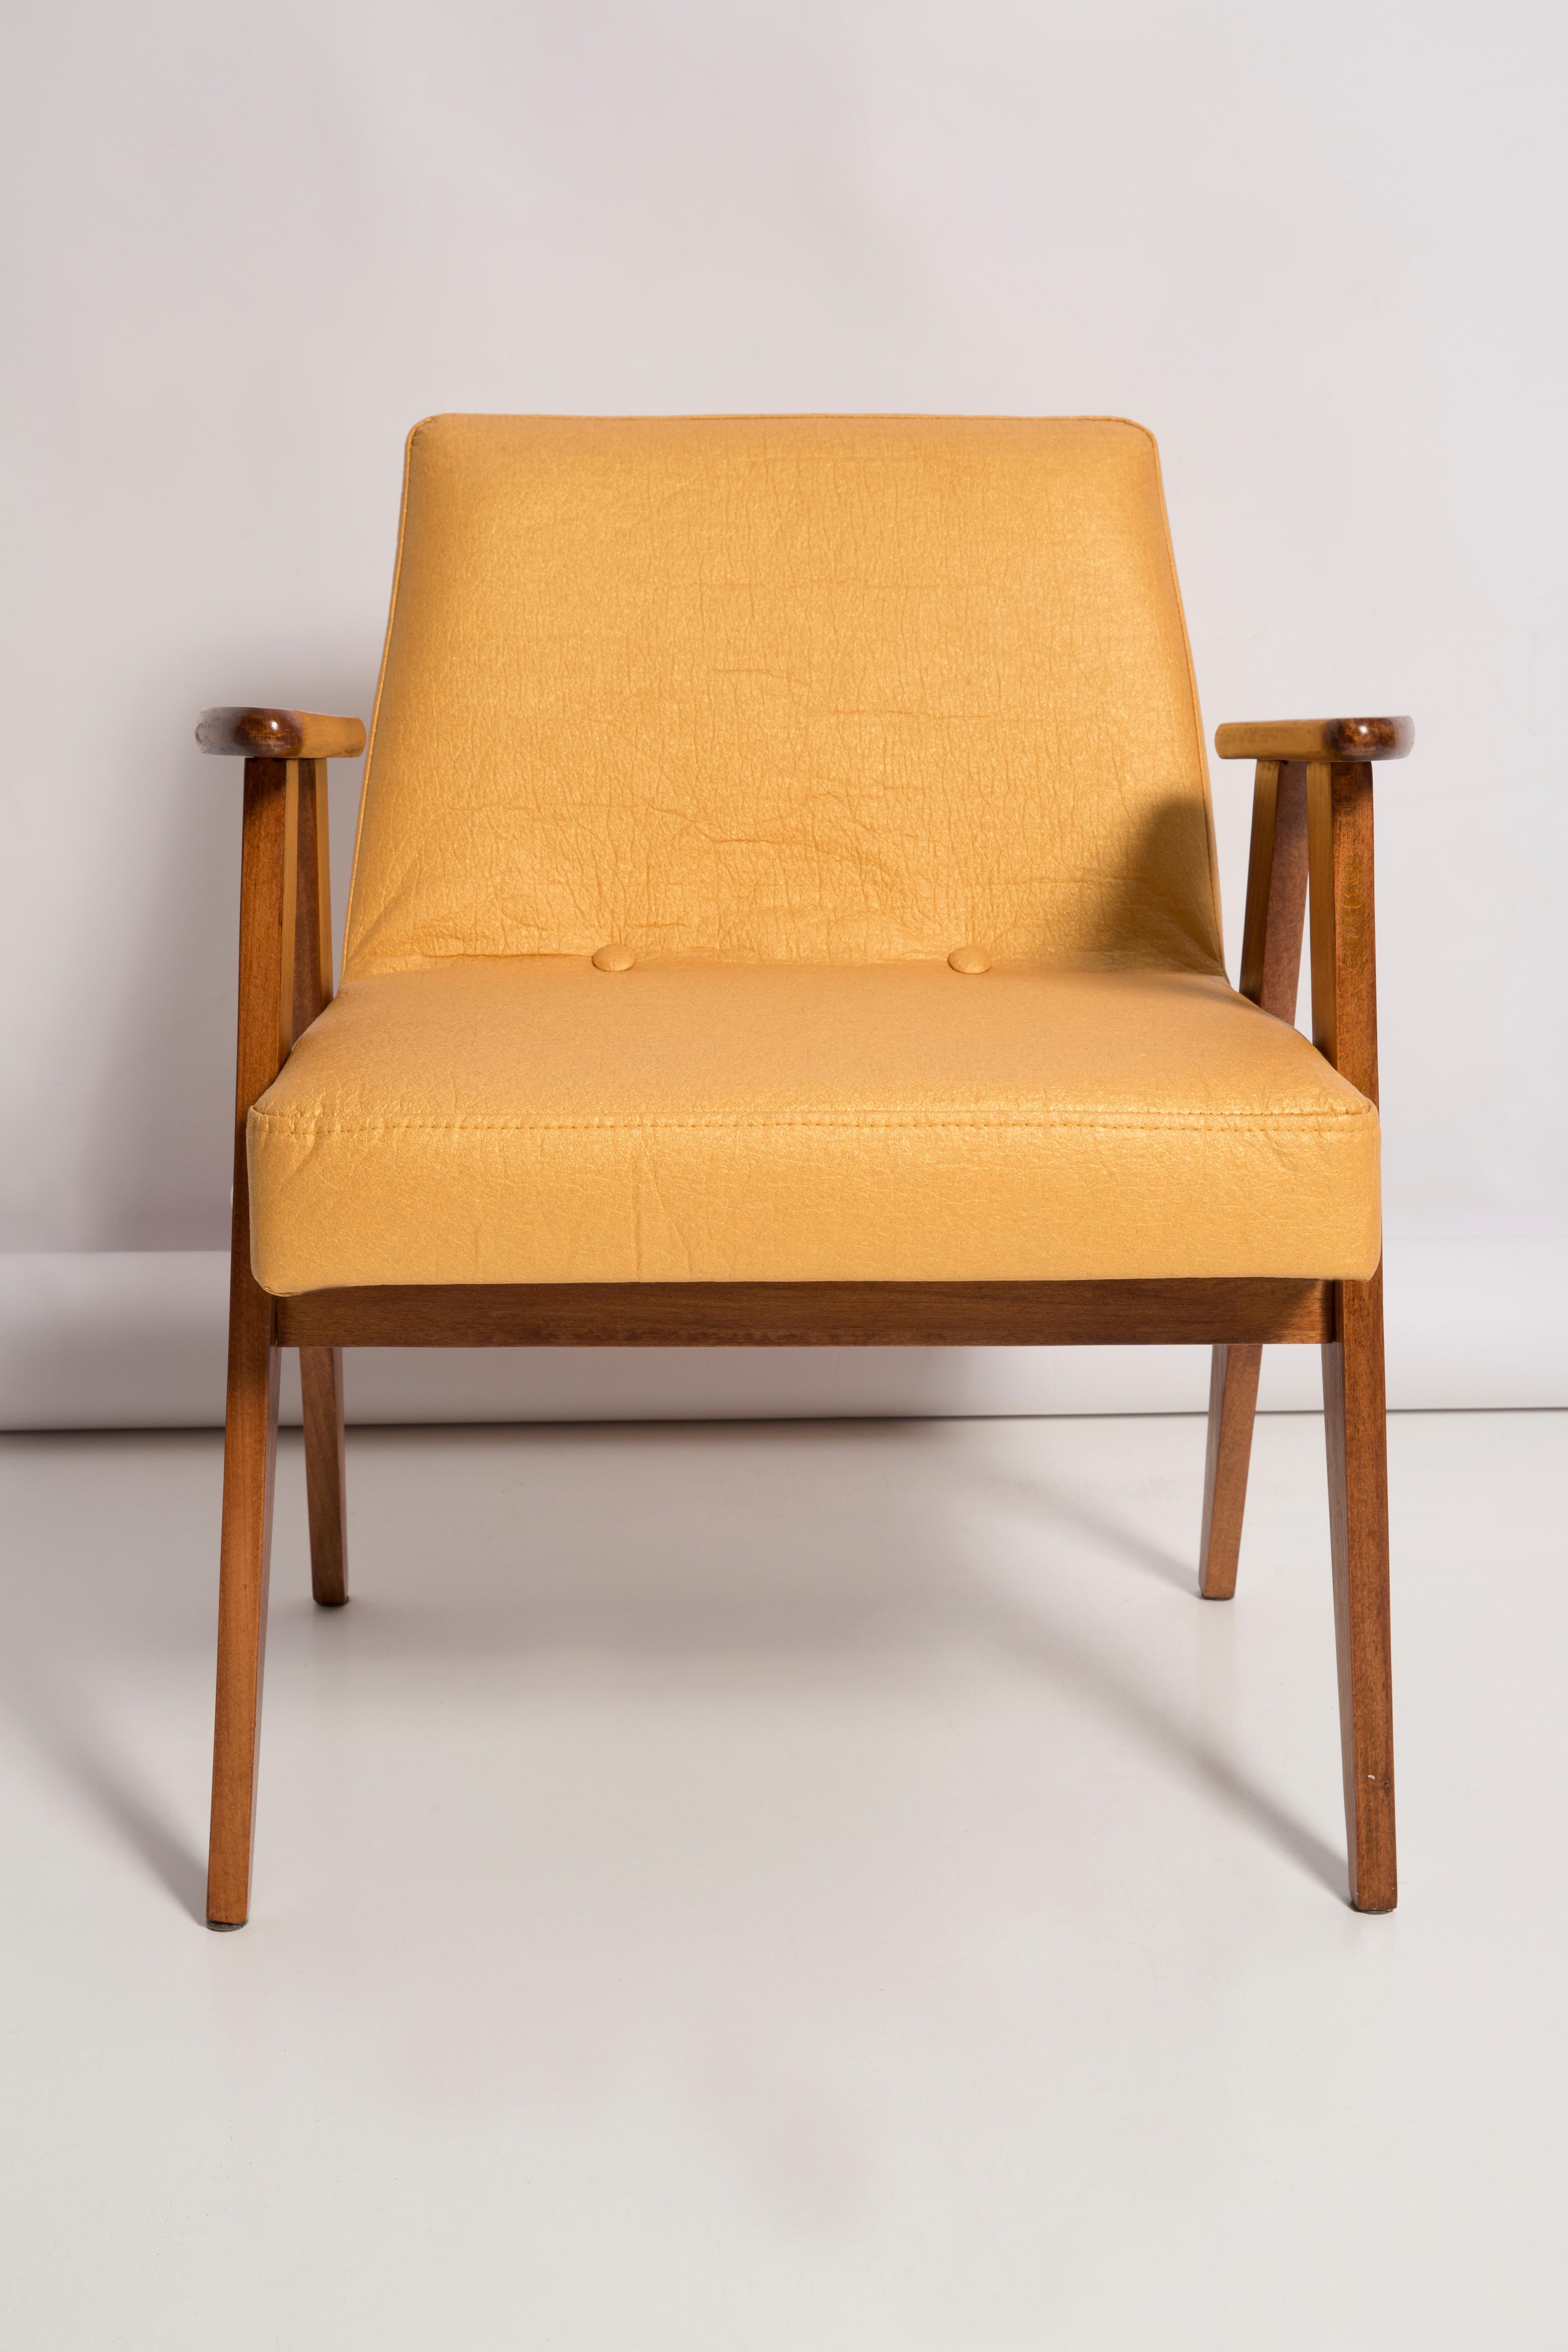 Two Midcentury 366 Club Armchairs in Pineapple Leather, Jozef Chierowski, 1960s For Sale 5